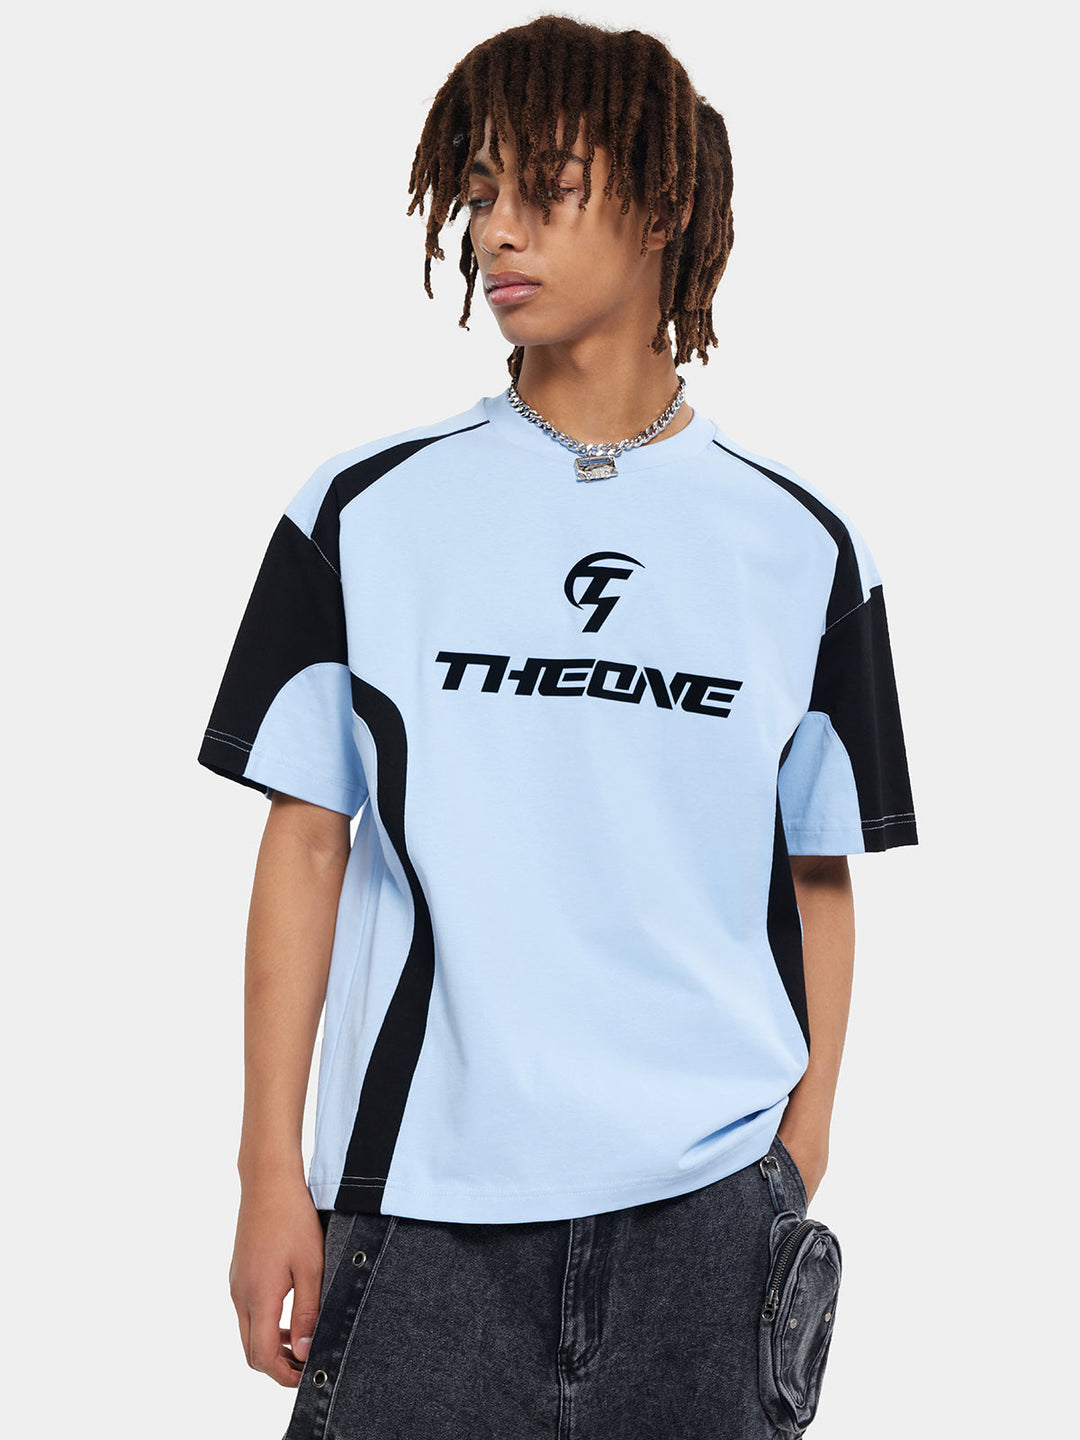 T-One Colorblock Letter Print Racing Tee-Blue